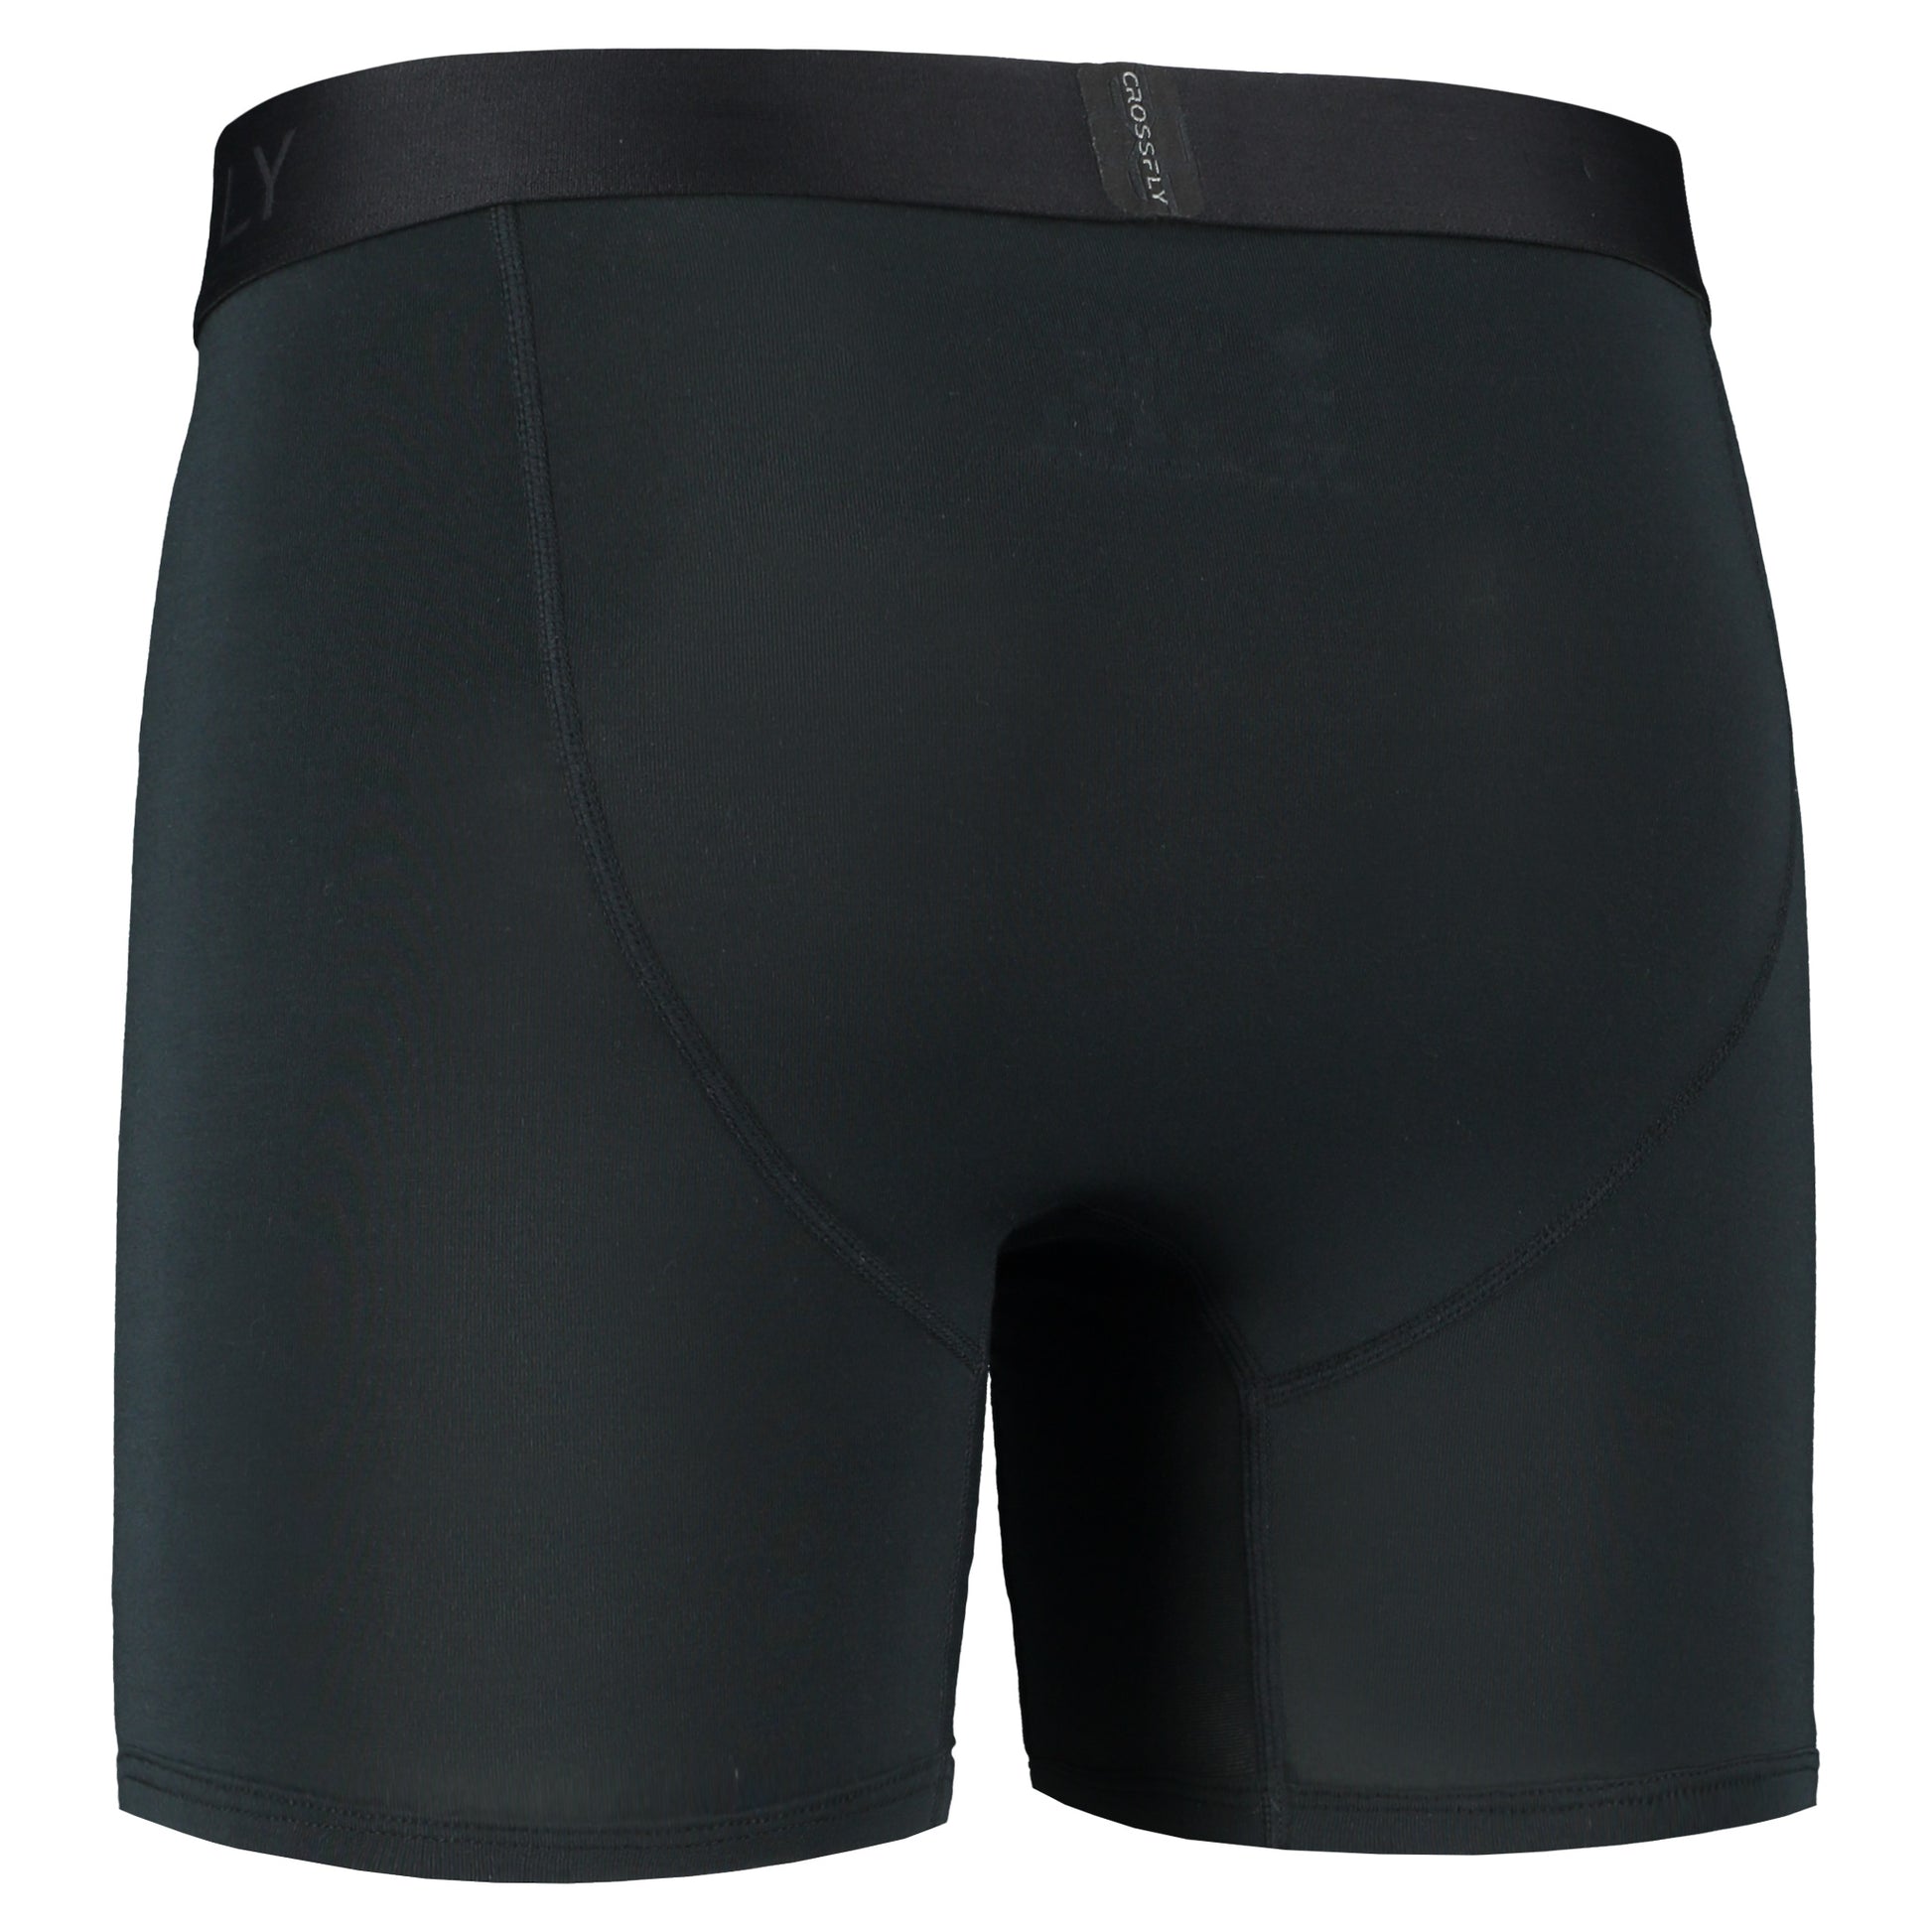 Crossfly men's IKON 6" black boxers from the Everyday series, featuring X-Fly and Coccoon internal pocket support.